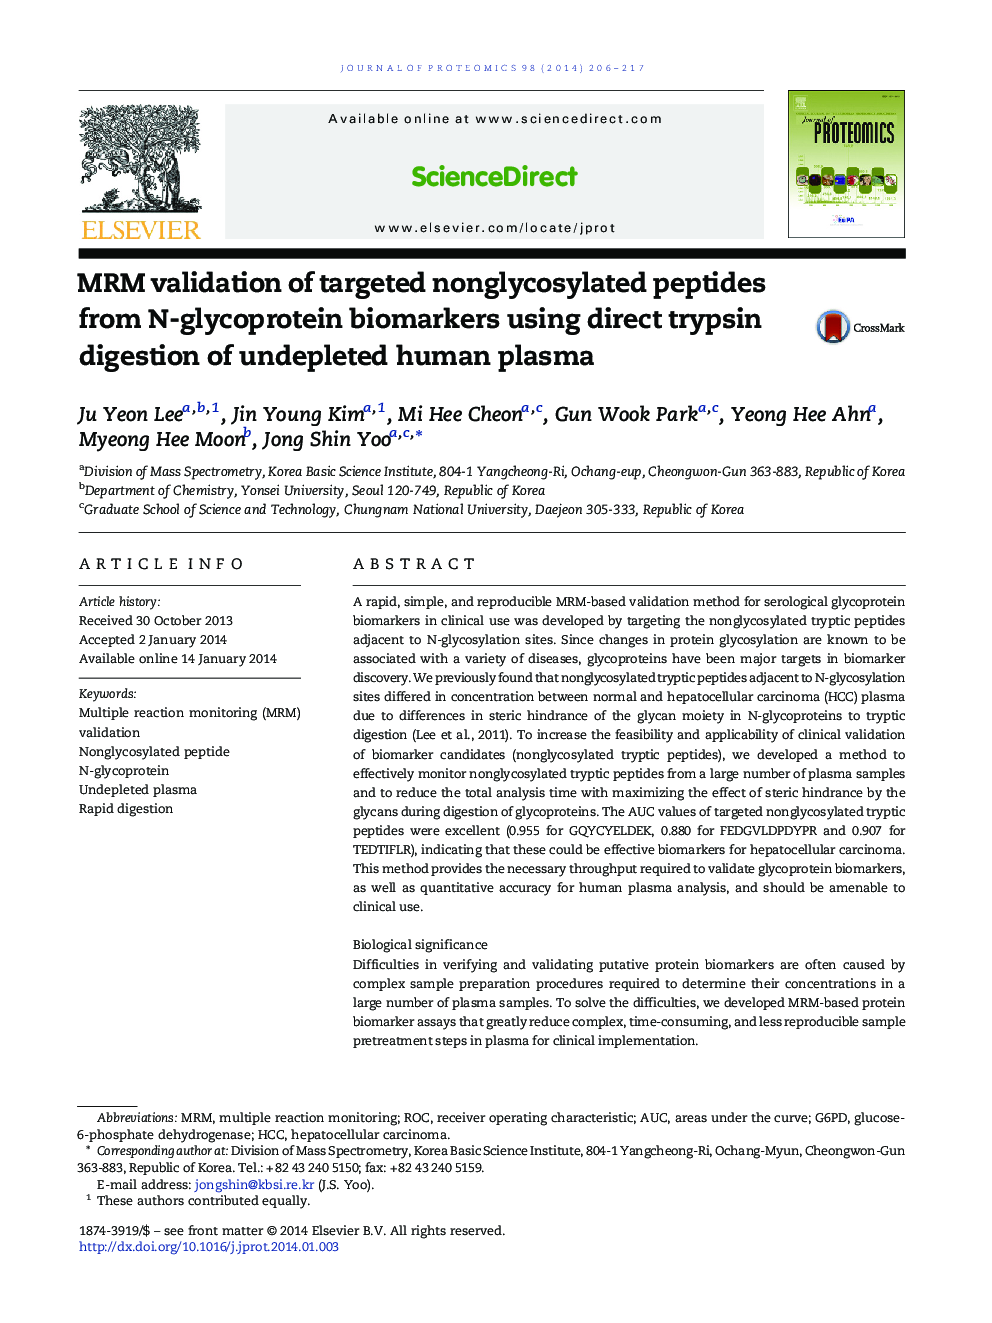 MRM validation of targeted nonglycosylated peptides from N-glycoprotein biomarkers using direct trypsin digestion of undepleted human plasma